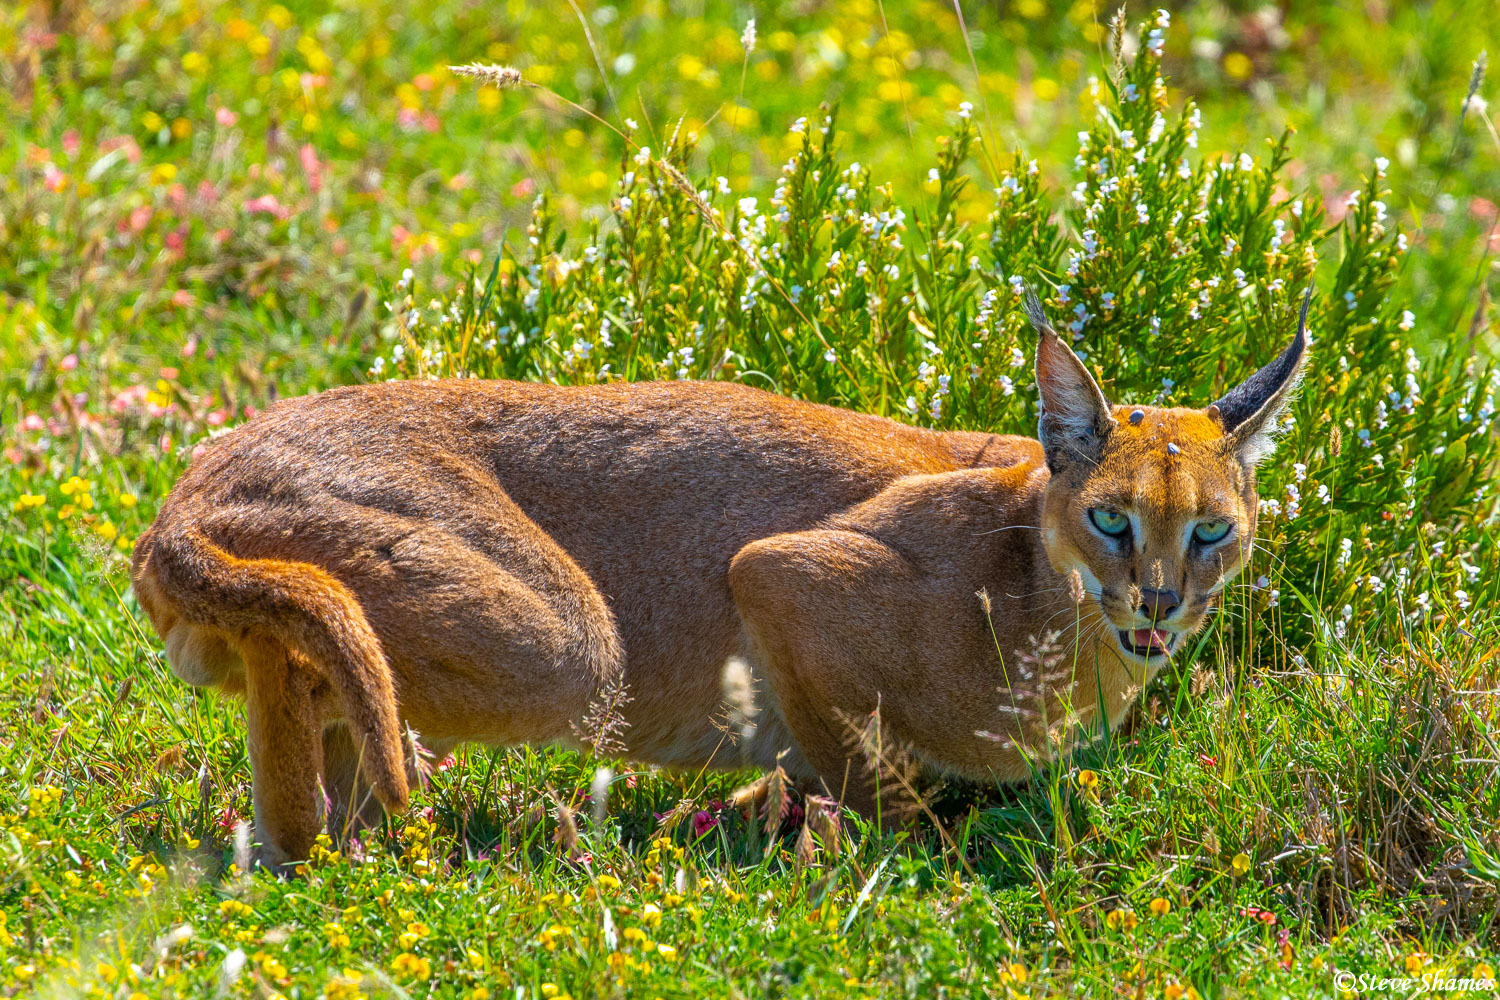 Caracal cat crouching in the grass.